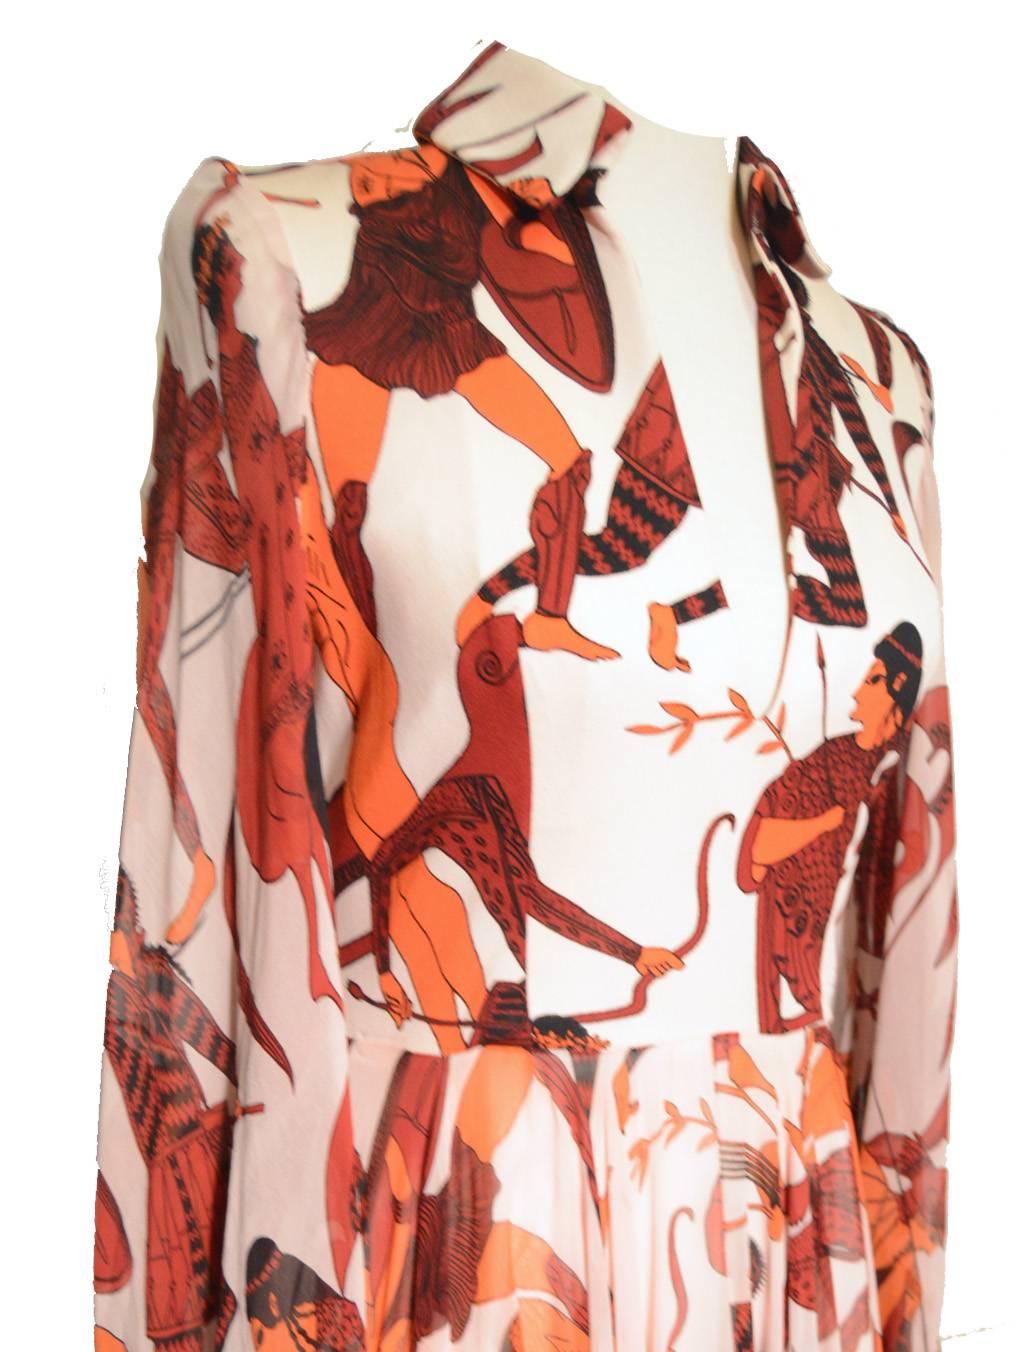 Vintage print silk dress by La Mendola for Nan Duskin c1970s.  Fabulous grecian print design throughout featuring ancient Greek or Roman hunters/warriors and horses in deep red, orange and black over a white background.  Polyester bodice with wide